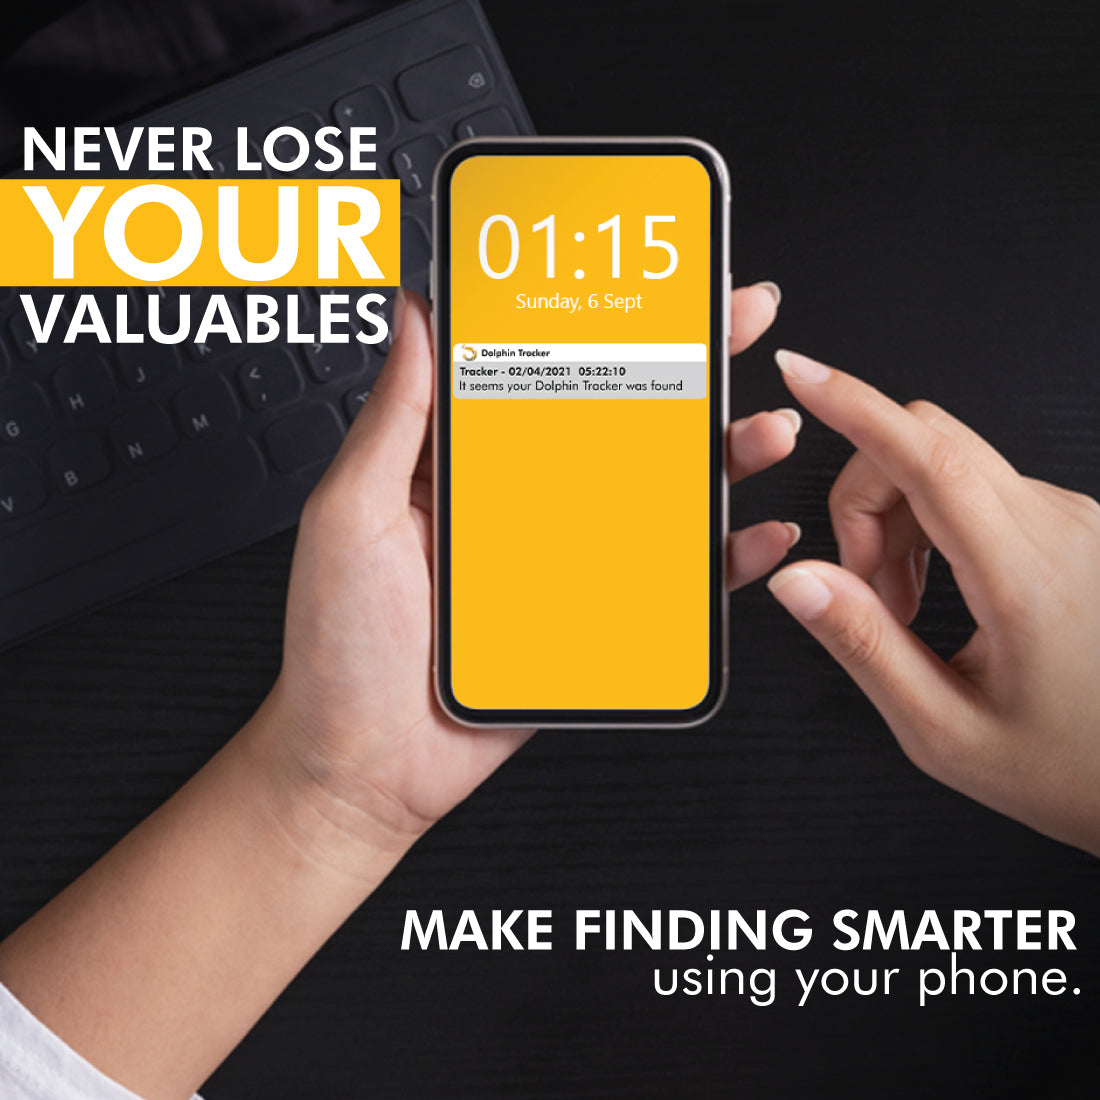 Never-lose-your-valuables-make-finding-smarter-tag8